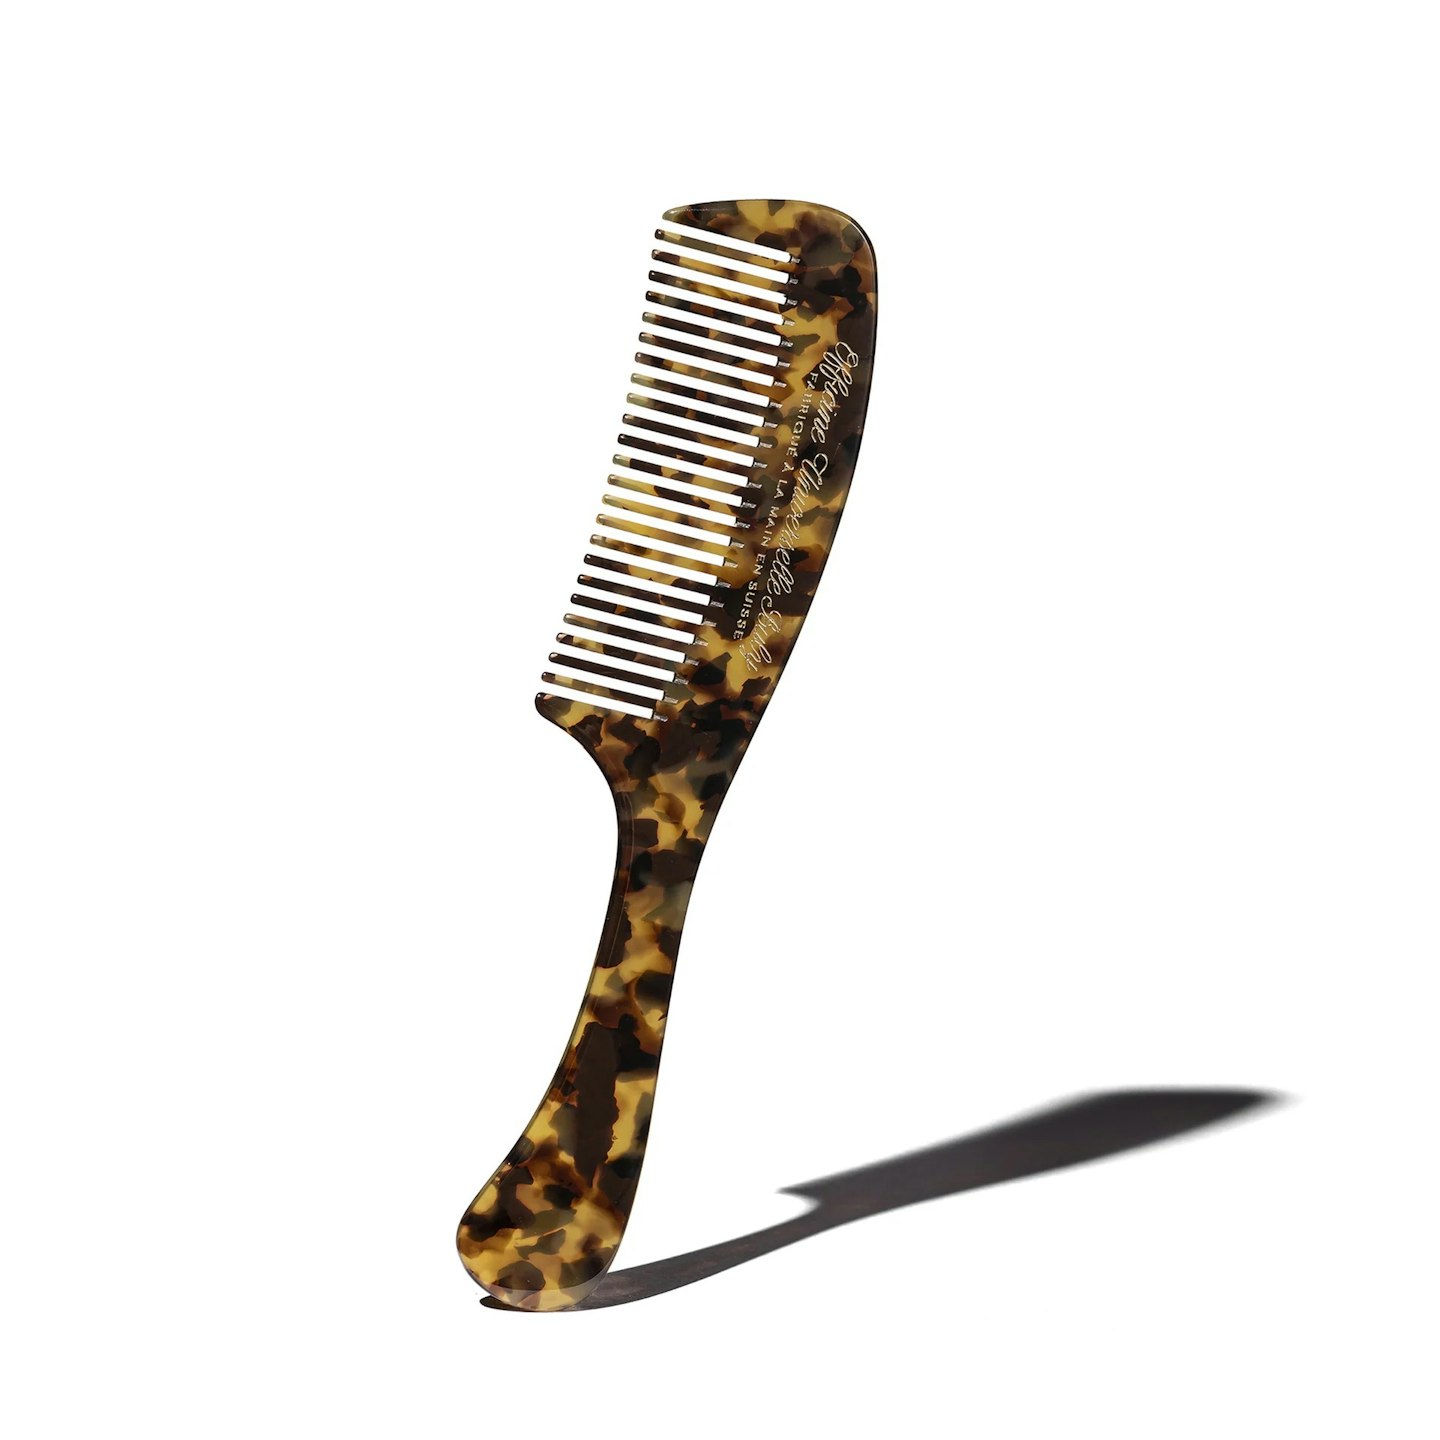 Buly 1803 The Amiable Comb